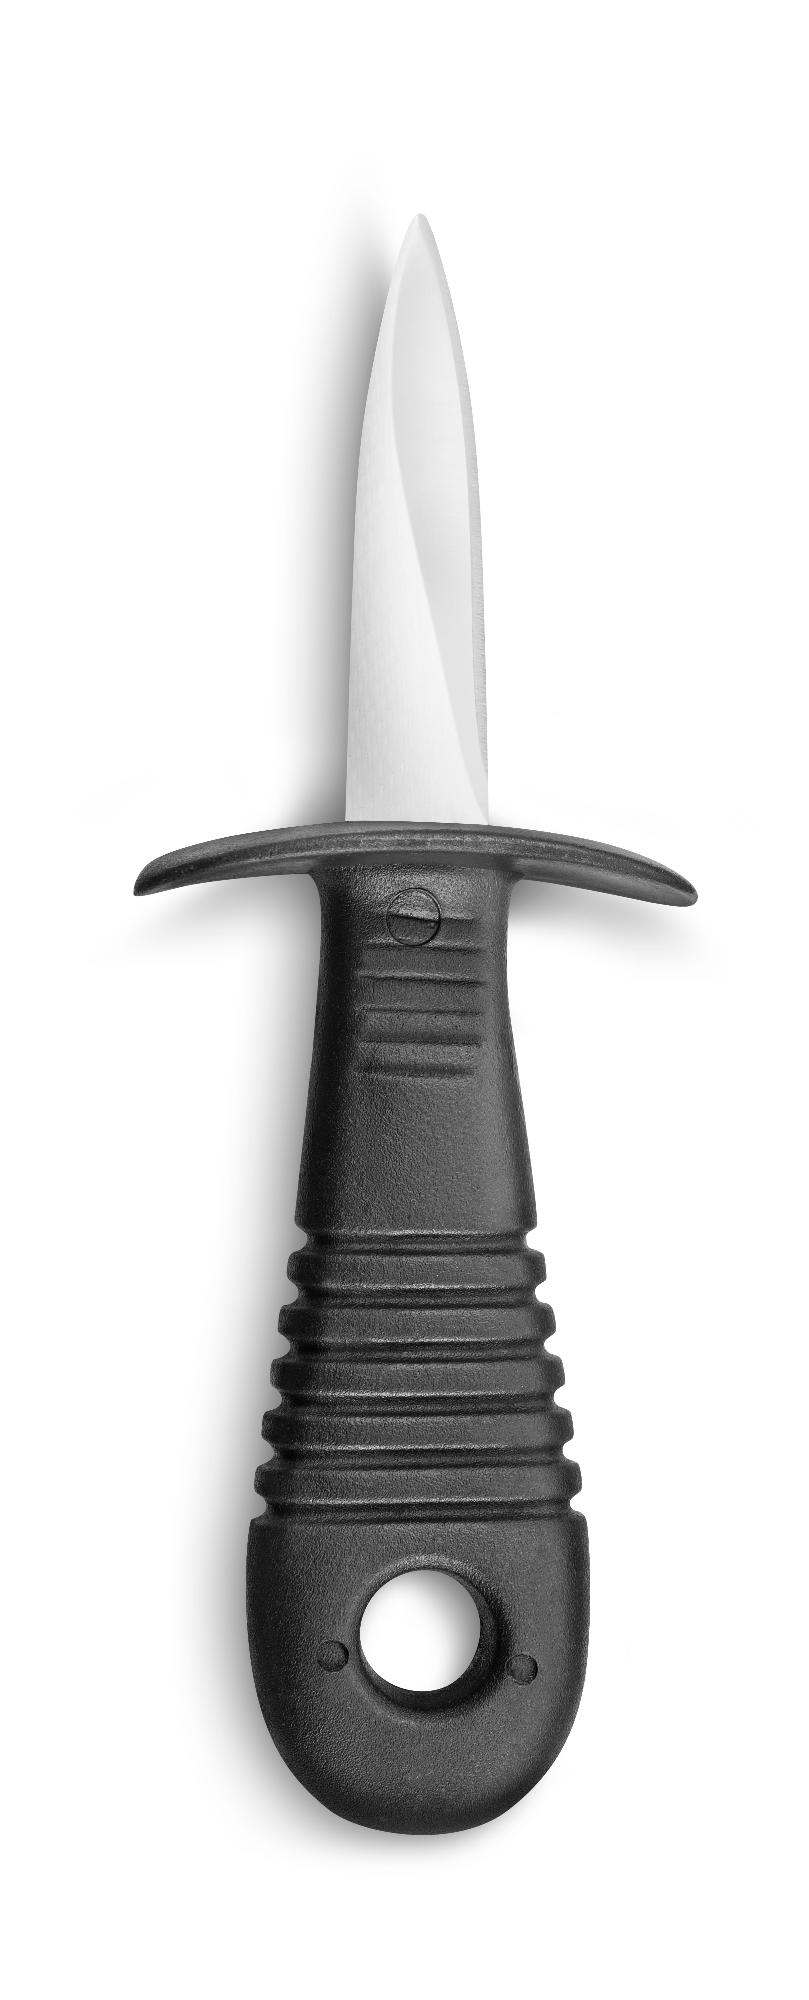 Oyster knife with guard, molded